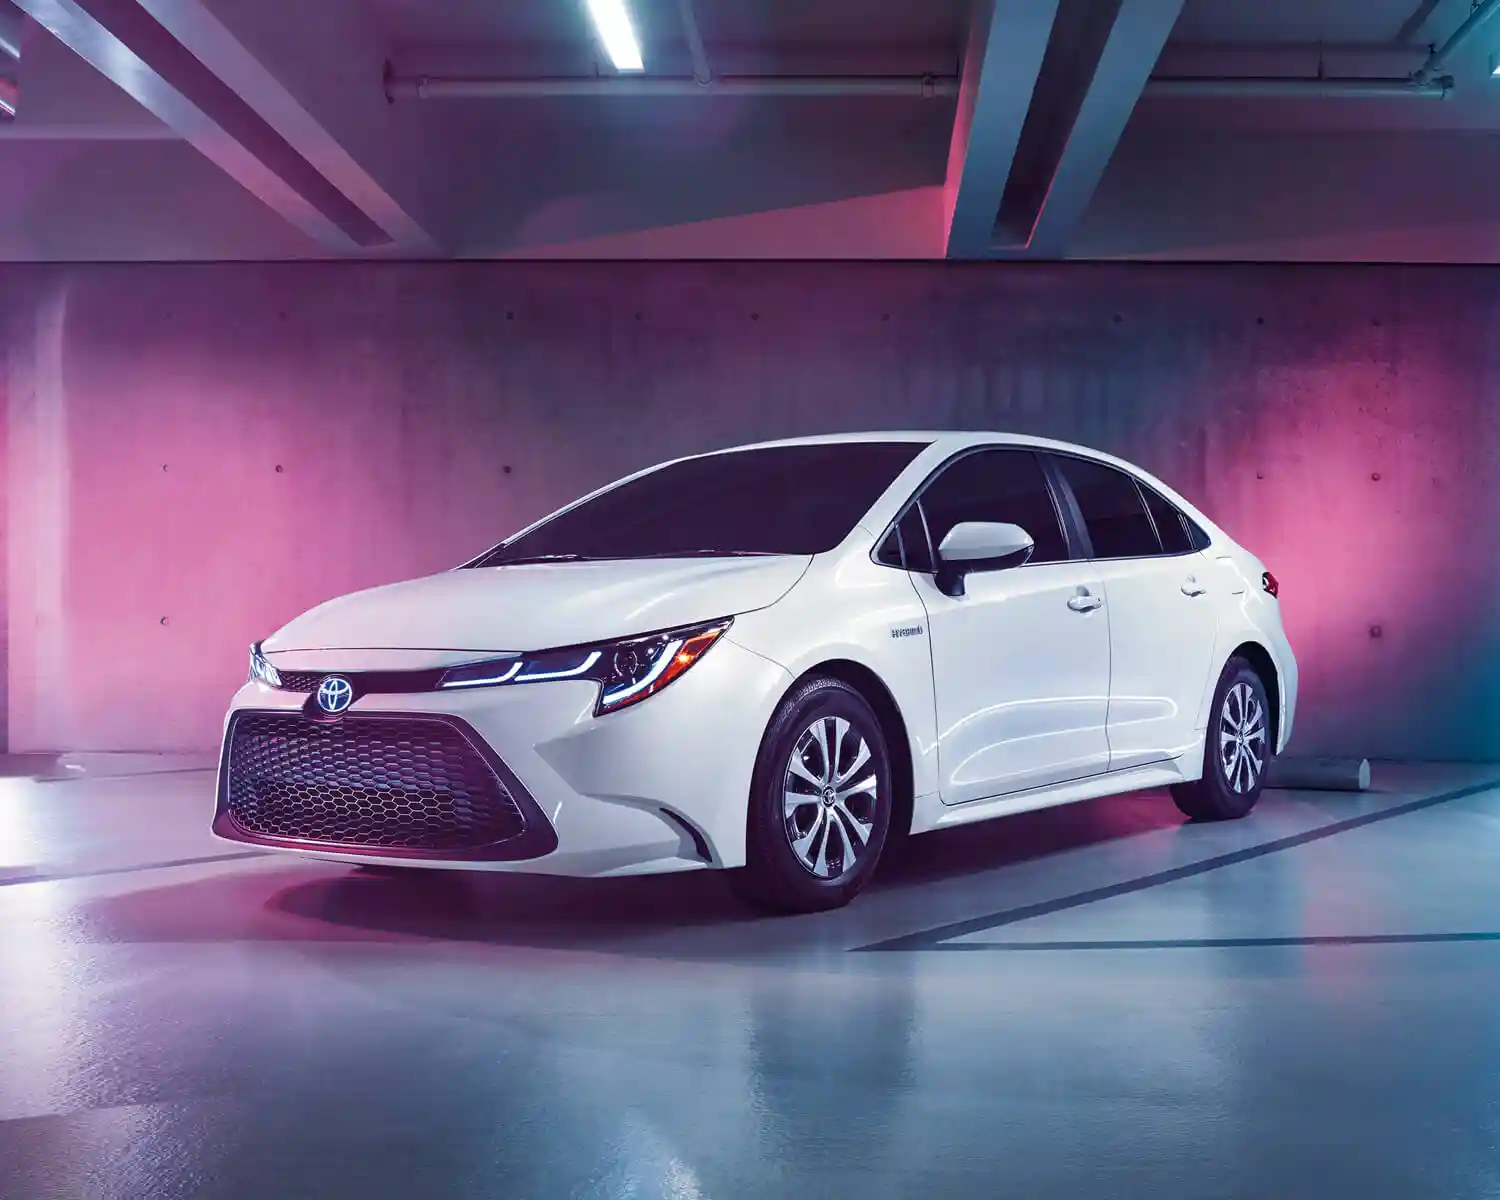 2020 Toyota Corolla News and Events